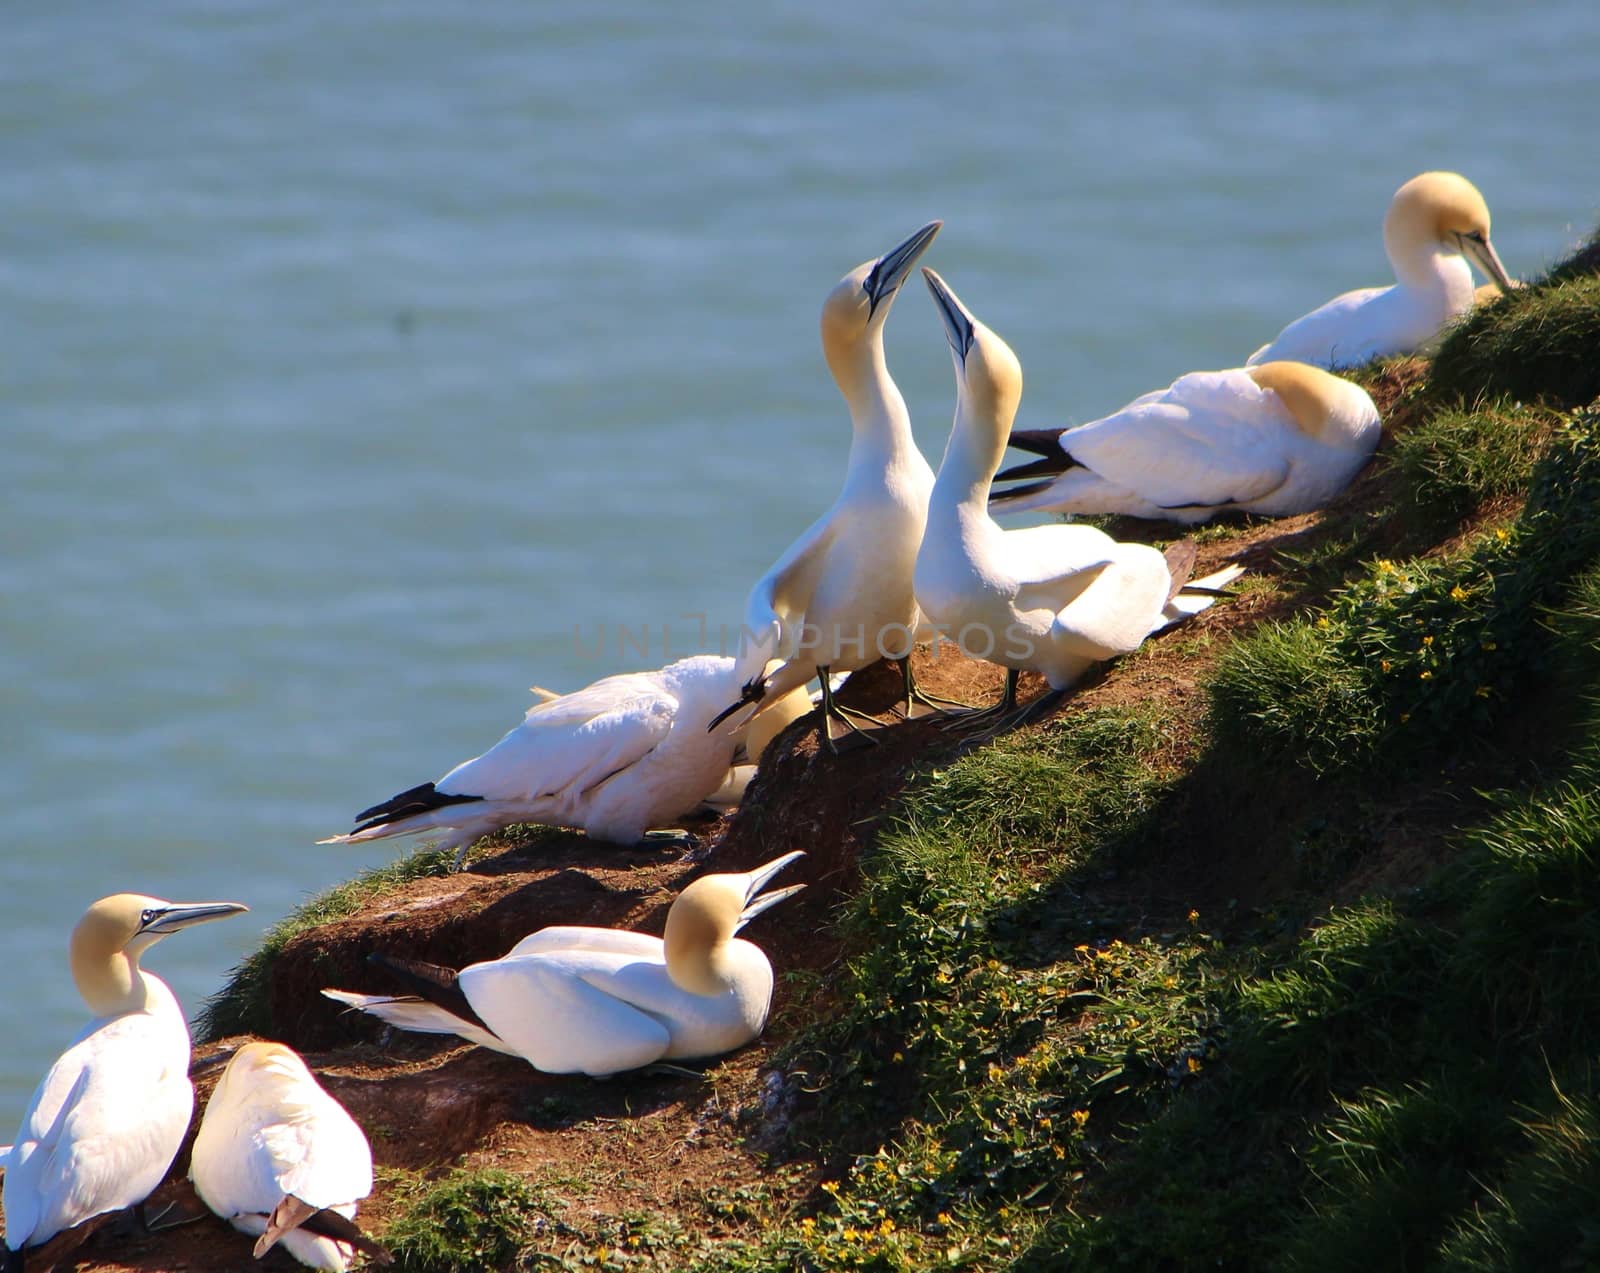 A close-up image of gannets nesting on the Yorkshire coast.